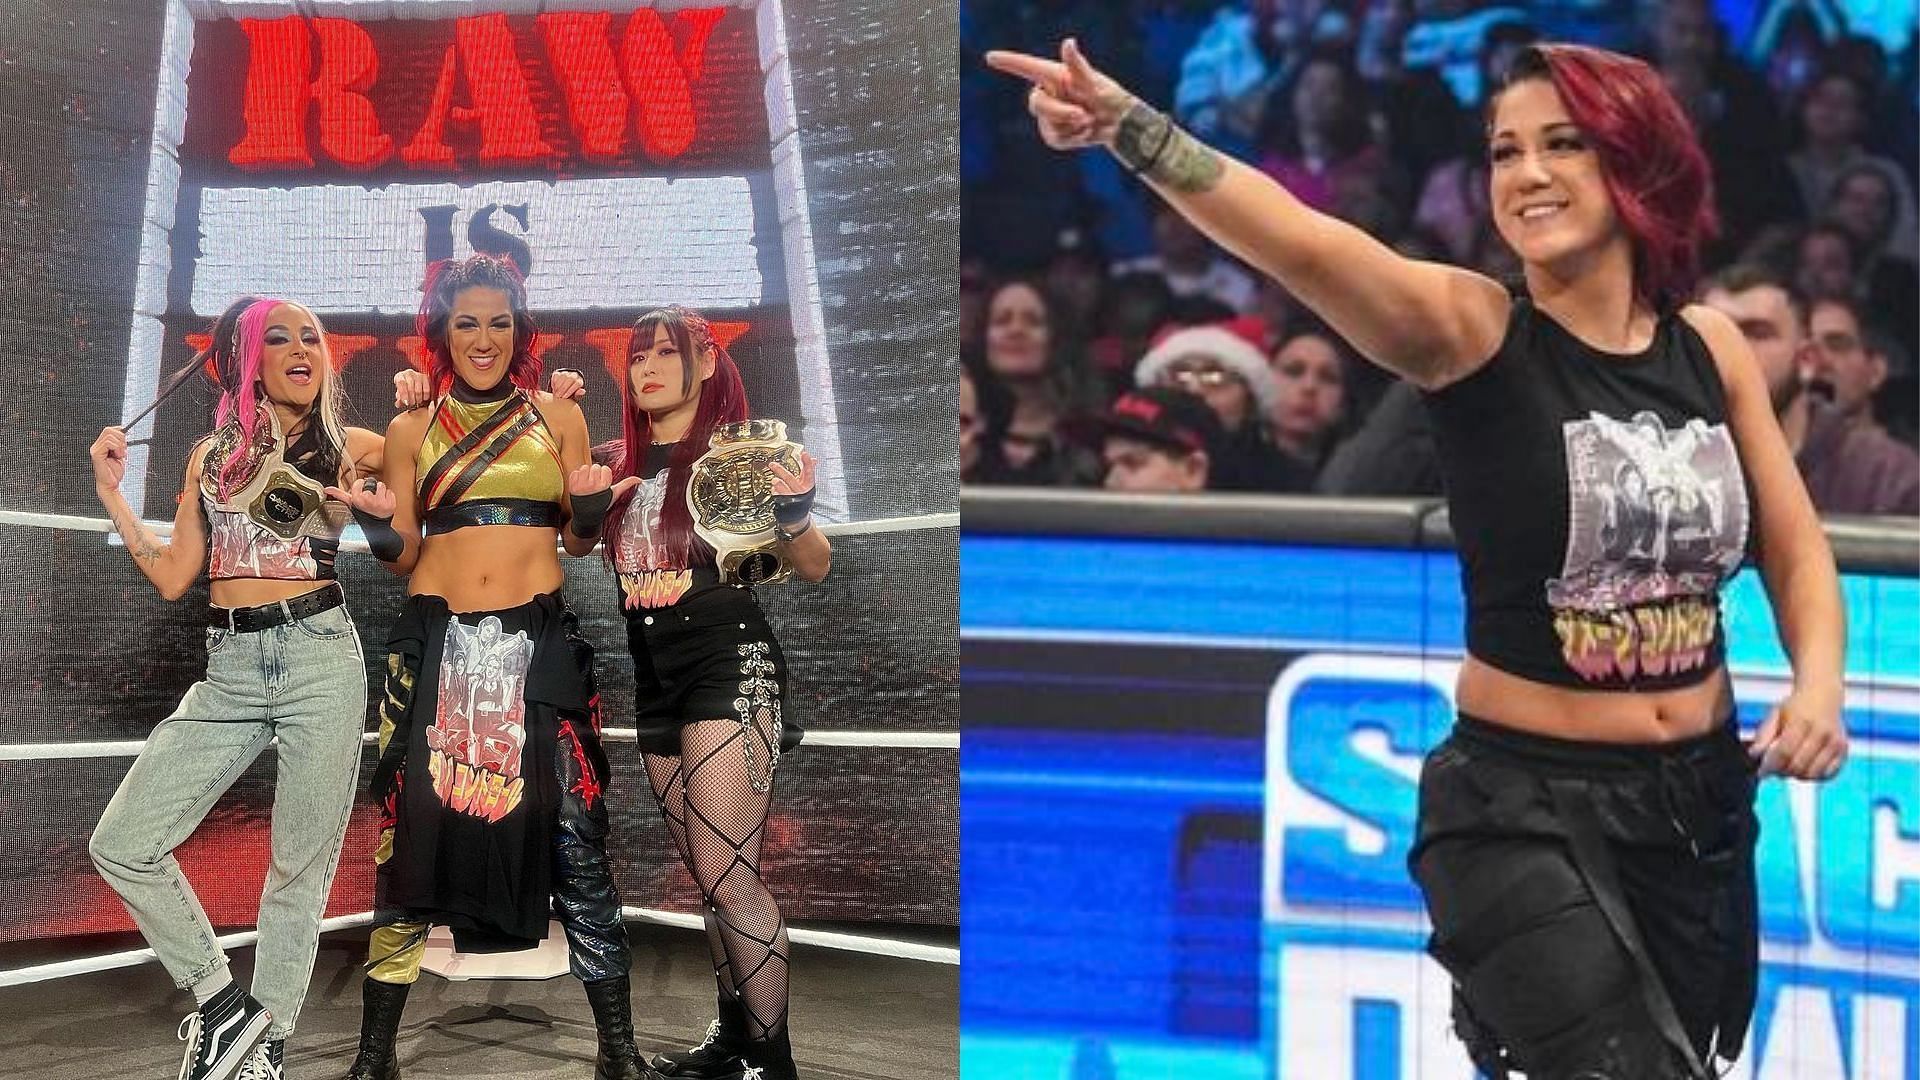 Bayley and Damage CTRL made a statement on SmackDown